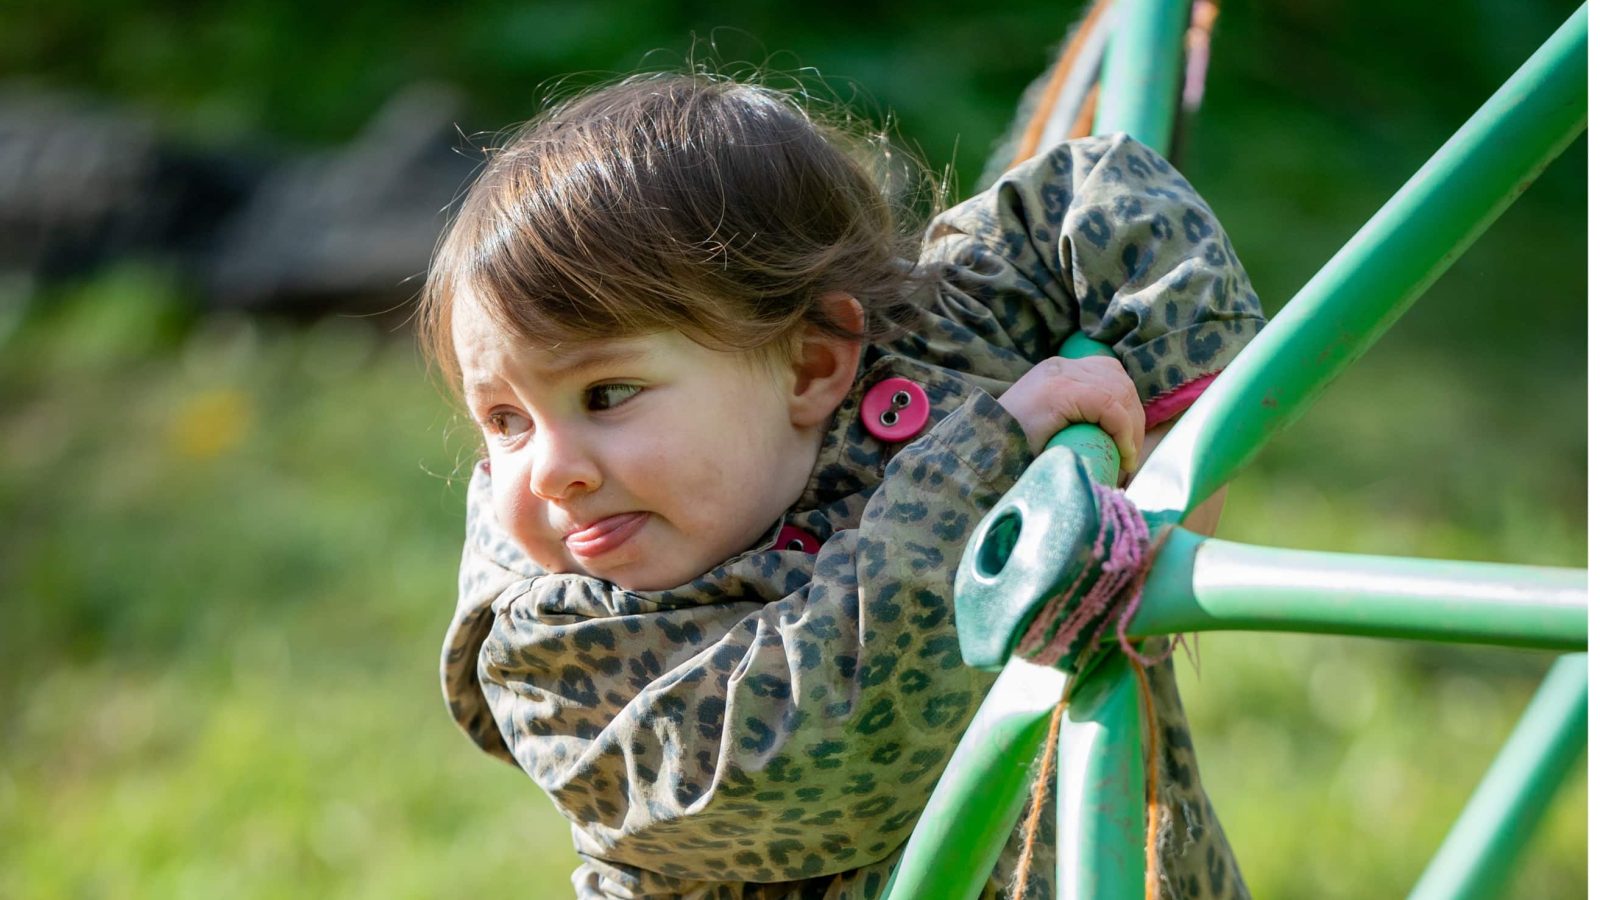 Young girl in a camouflage jacket hugging the bars of a green playground structure, smiling gently with a natural background.